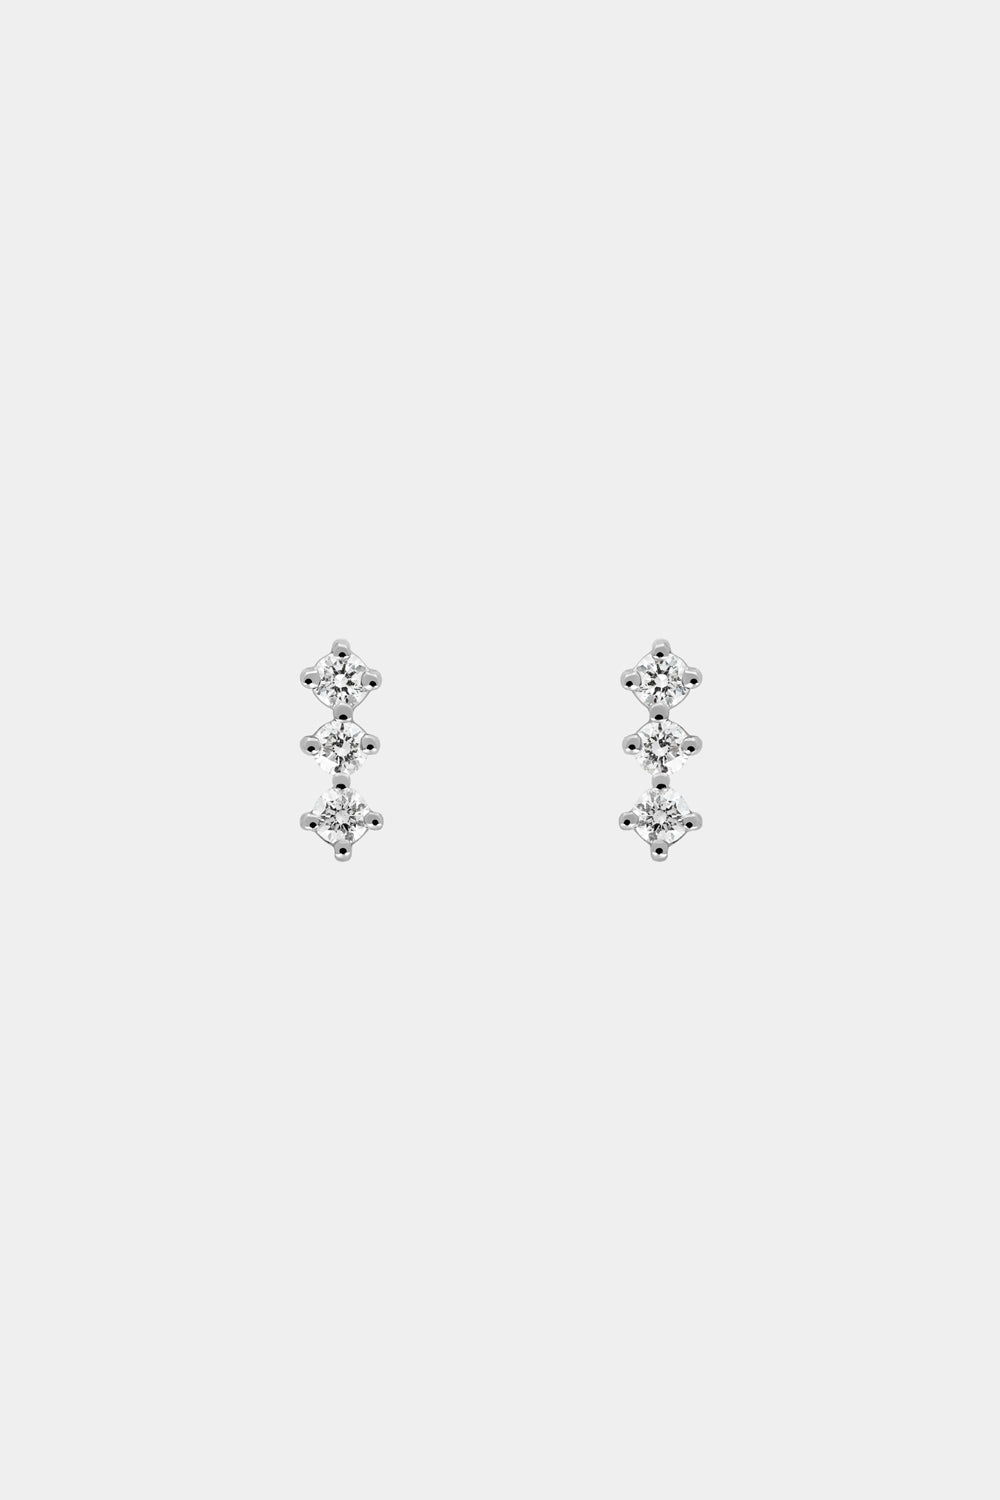 Buttercup Diamond Bar Earrings | White Gold, More Options Available| Natasha Schweitzer